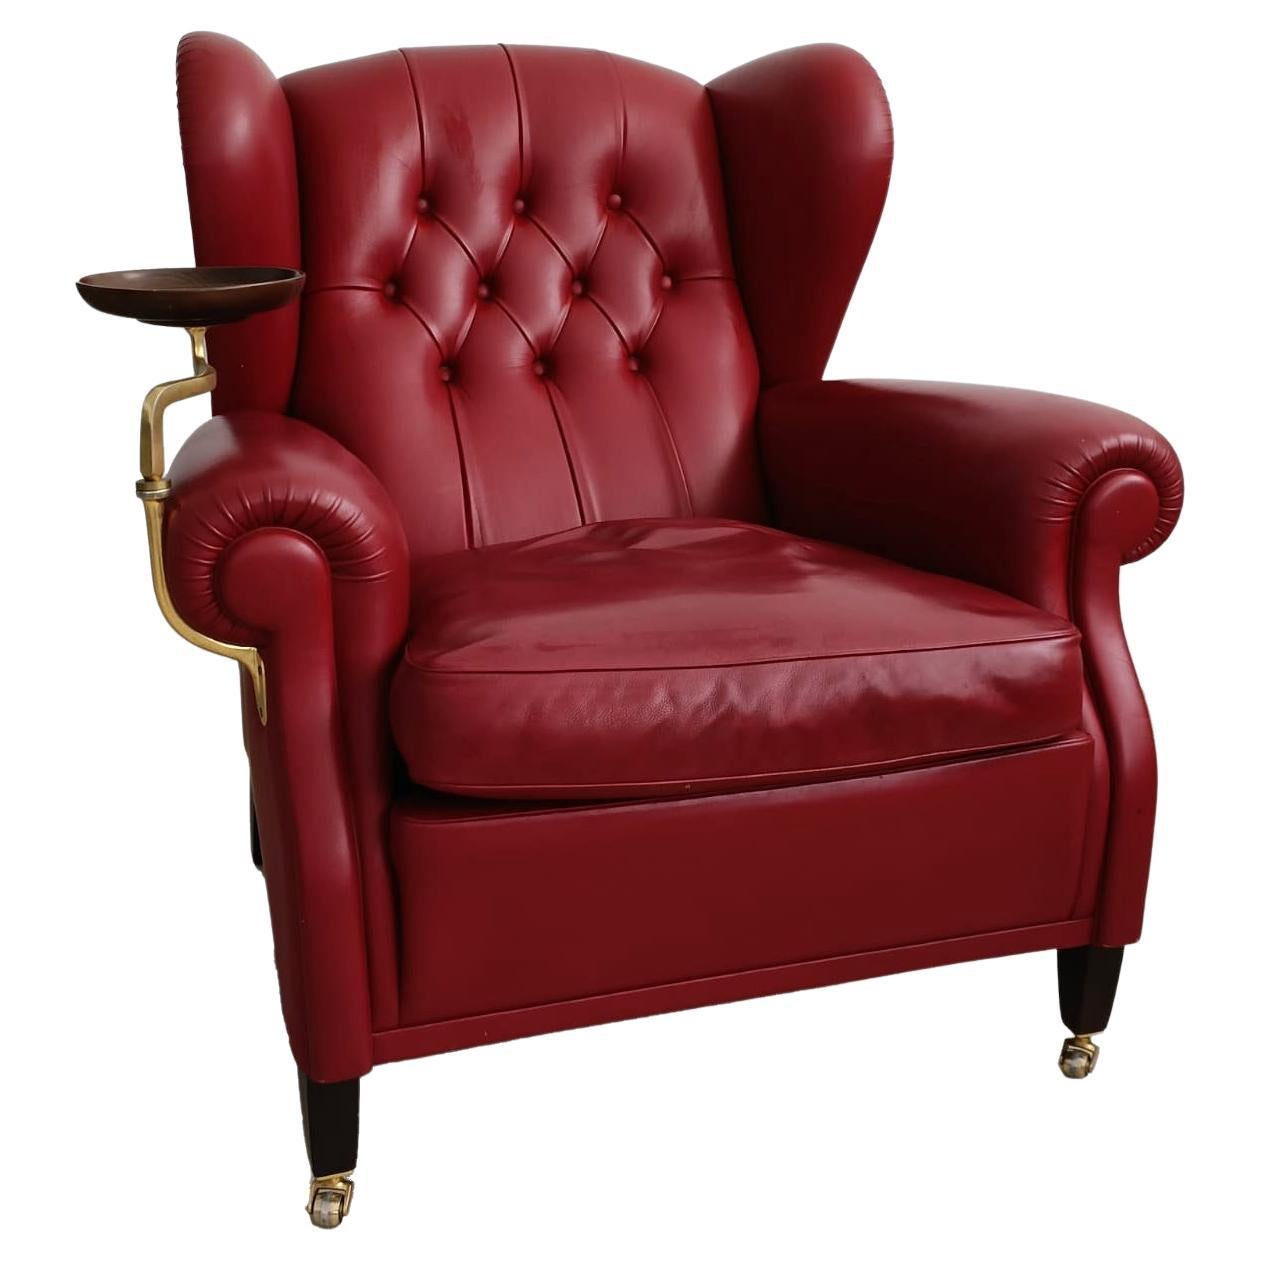 1919 Armchair Bergere Model in Century Leather Red Colour with Ashtray